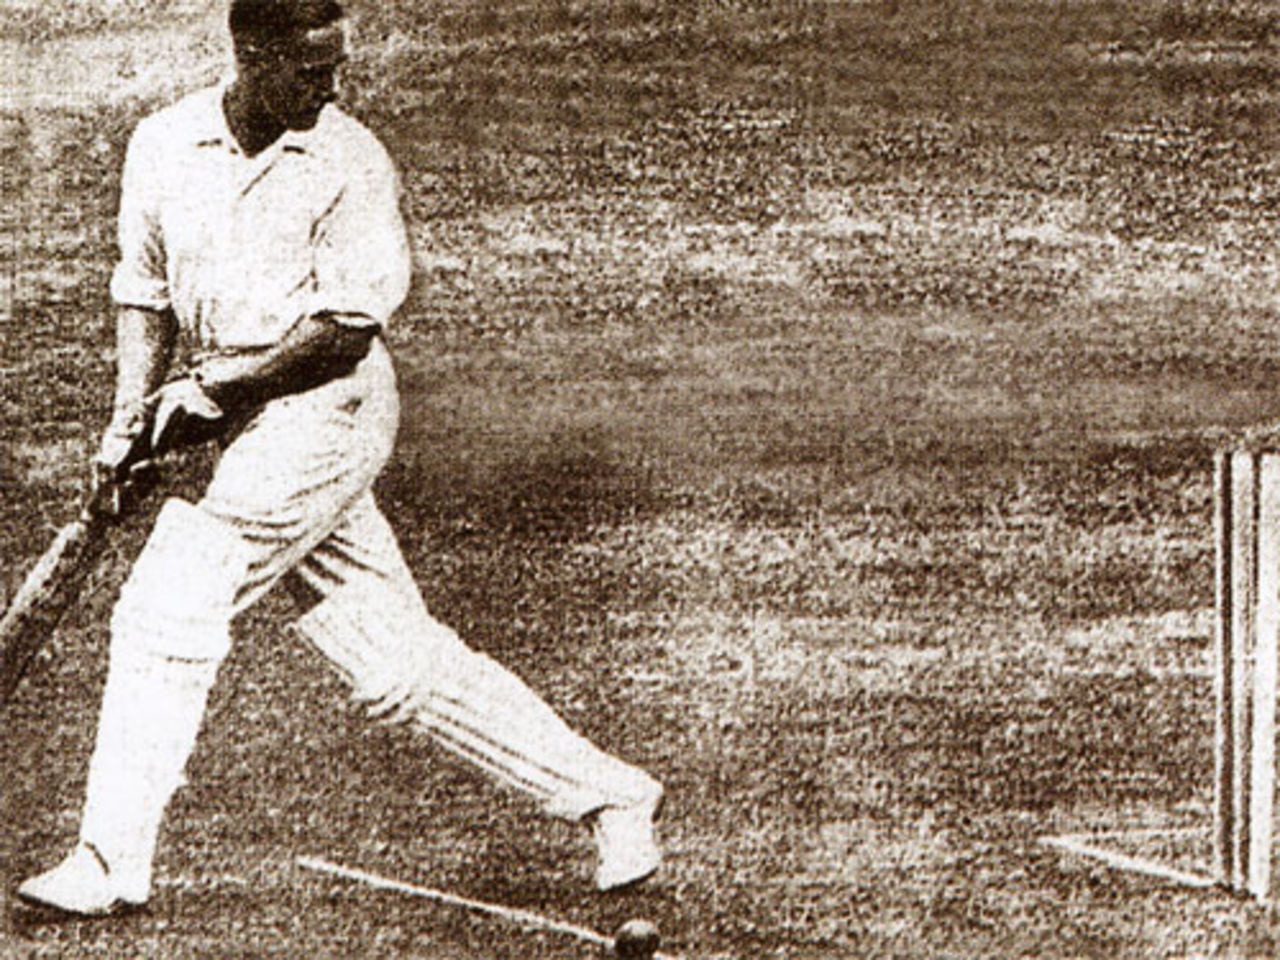 Herbert Sutcliffe is bowled by Mohammad Nissar - India's first Test wicket, England v India, Lord's, June 25, 1932